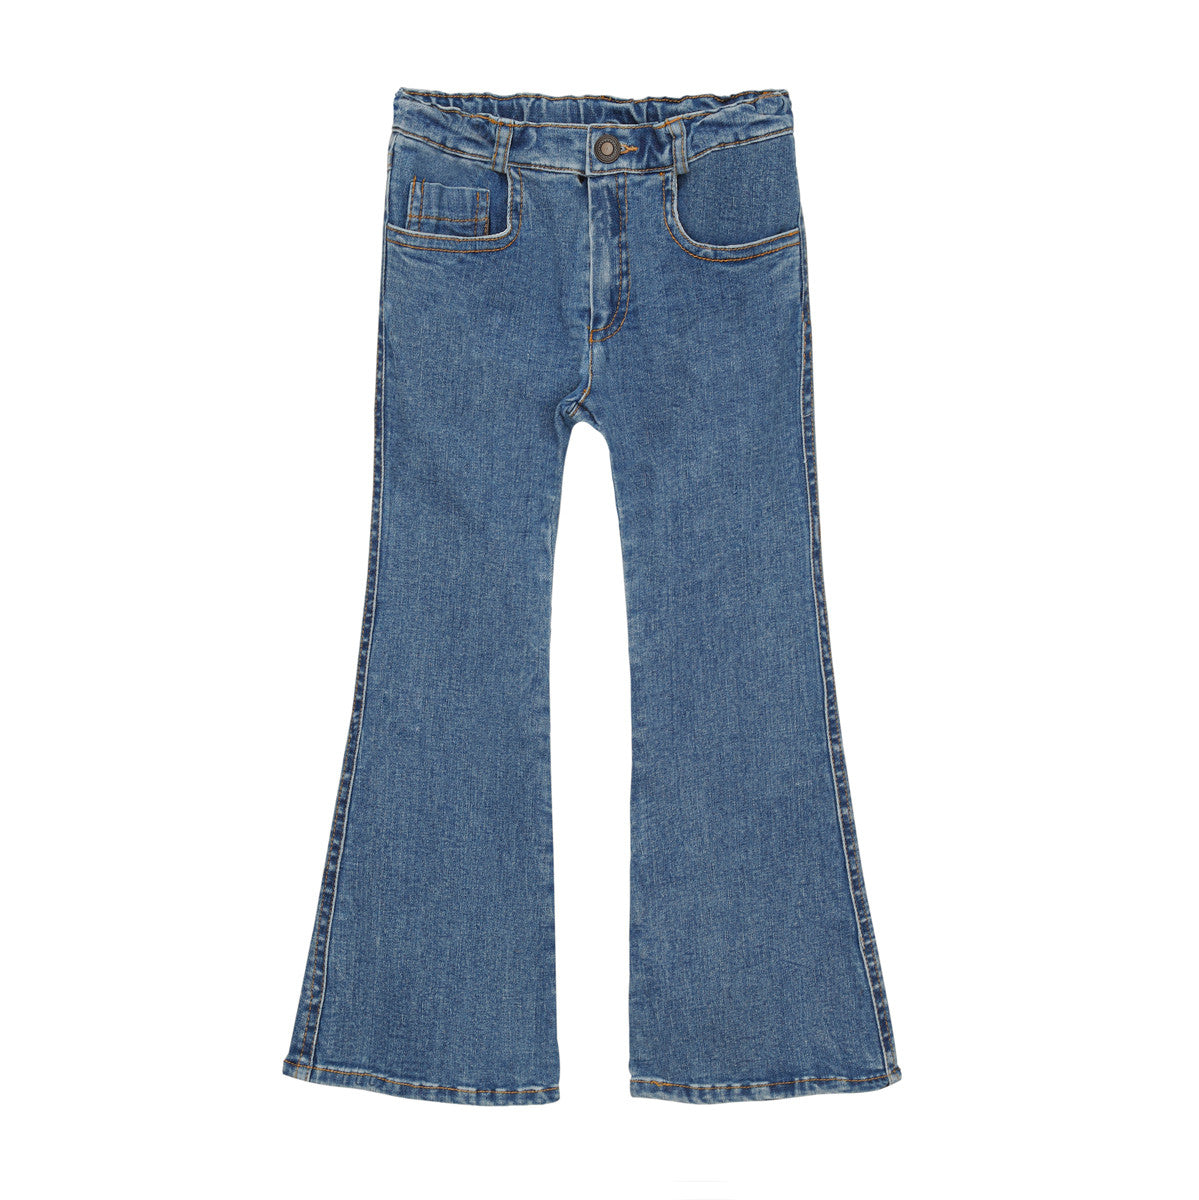 Little Hedonist 5-pocket flared pants in Light Blue Denim, slim fit thighs, for boys and girls. Made from the softest organic fabric. Sustainable unisex kids clothing.